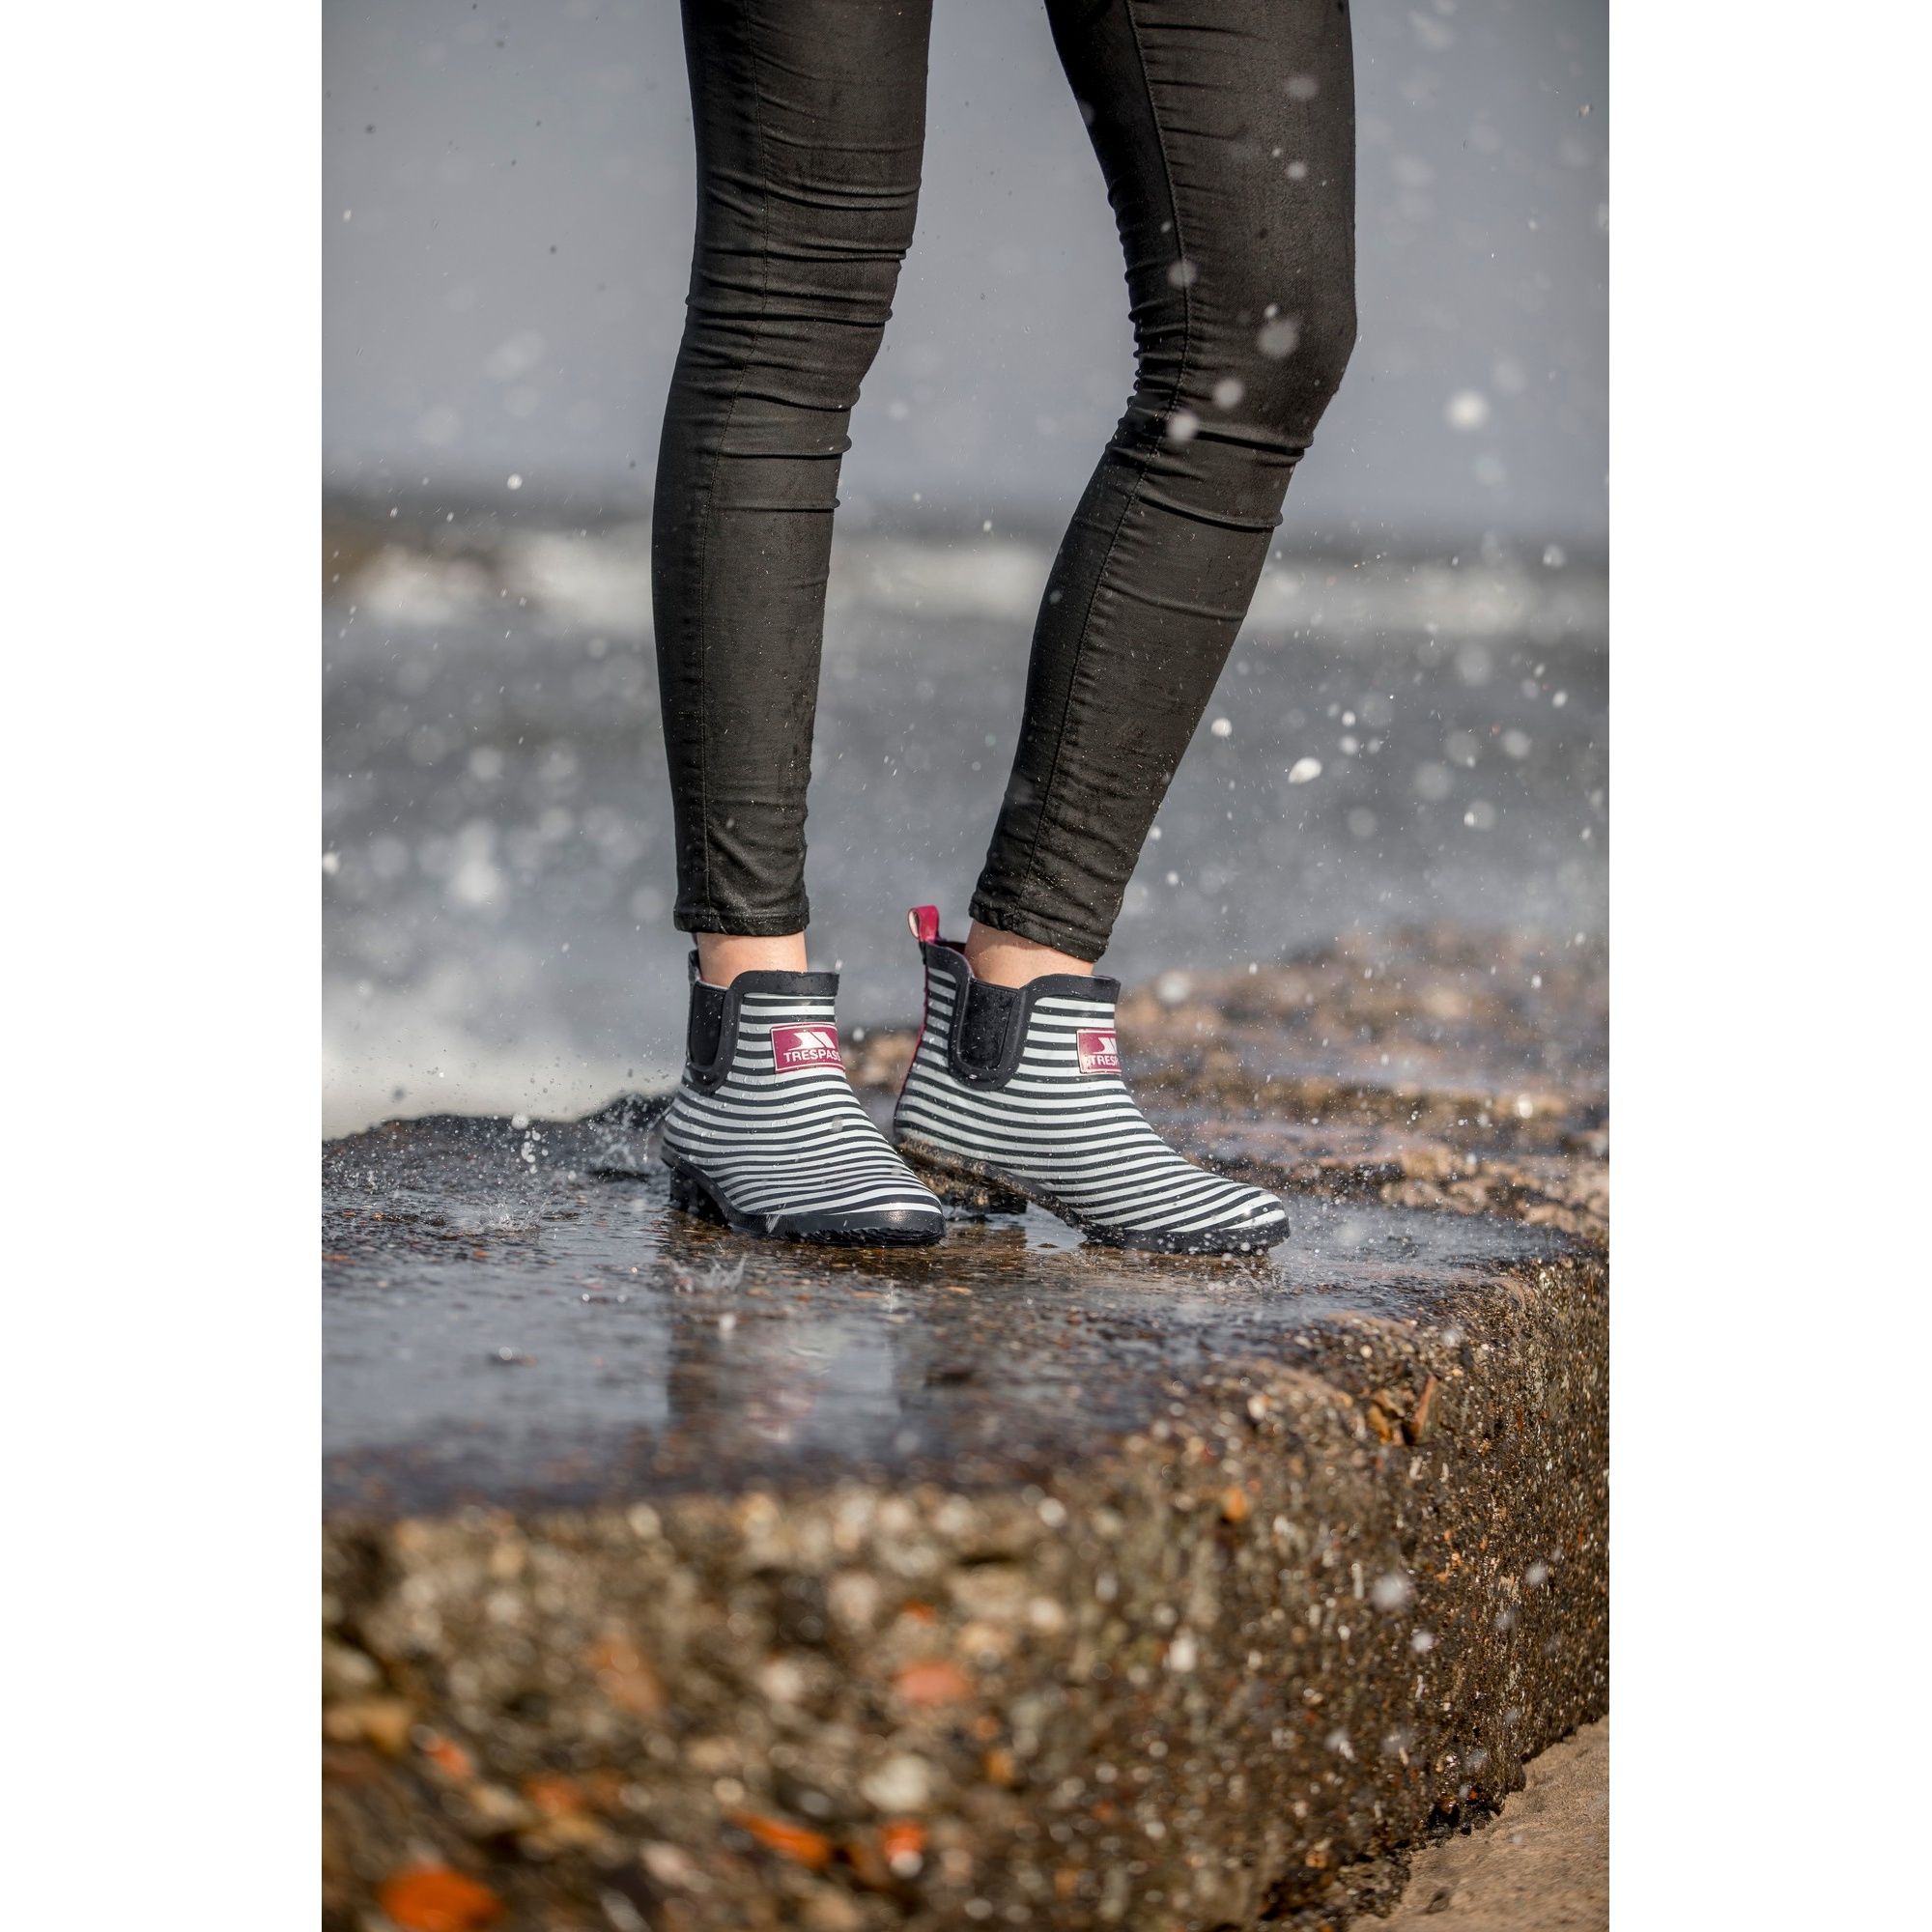 Ankle length rainboot. Raised Trespass print. Cushioned footbed. Durable grip sole. Waterproof. Upper: Rubber, Lining: Textile, Insole: EVA, Outsole: Rubber.